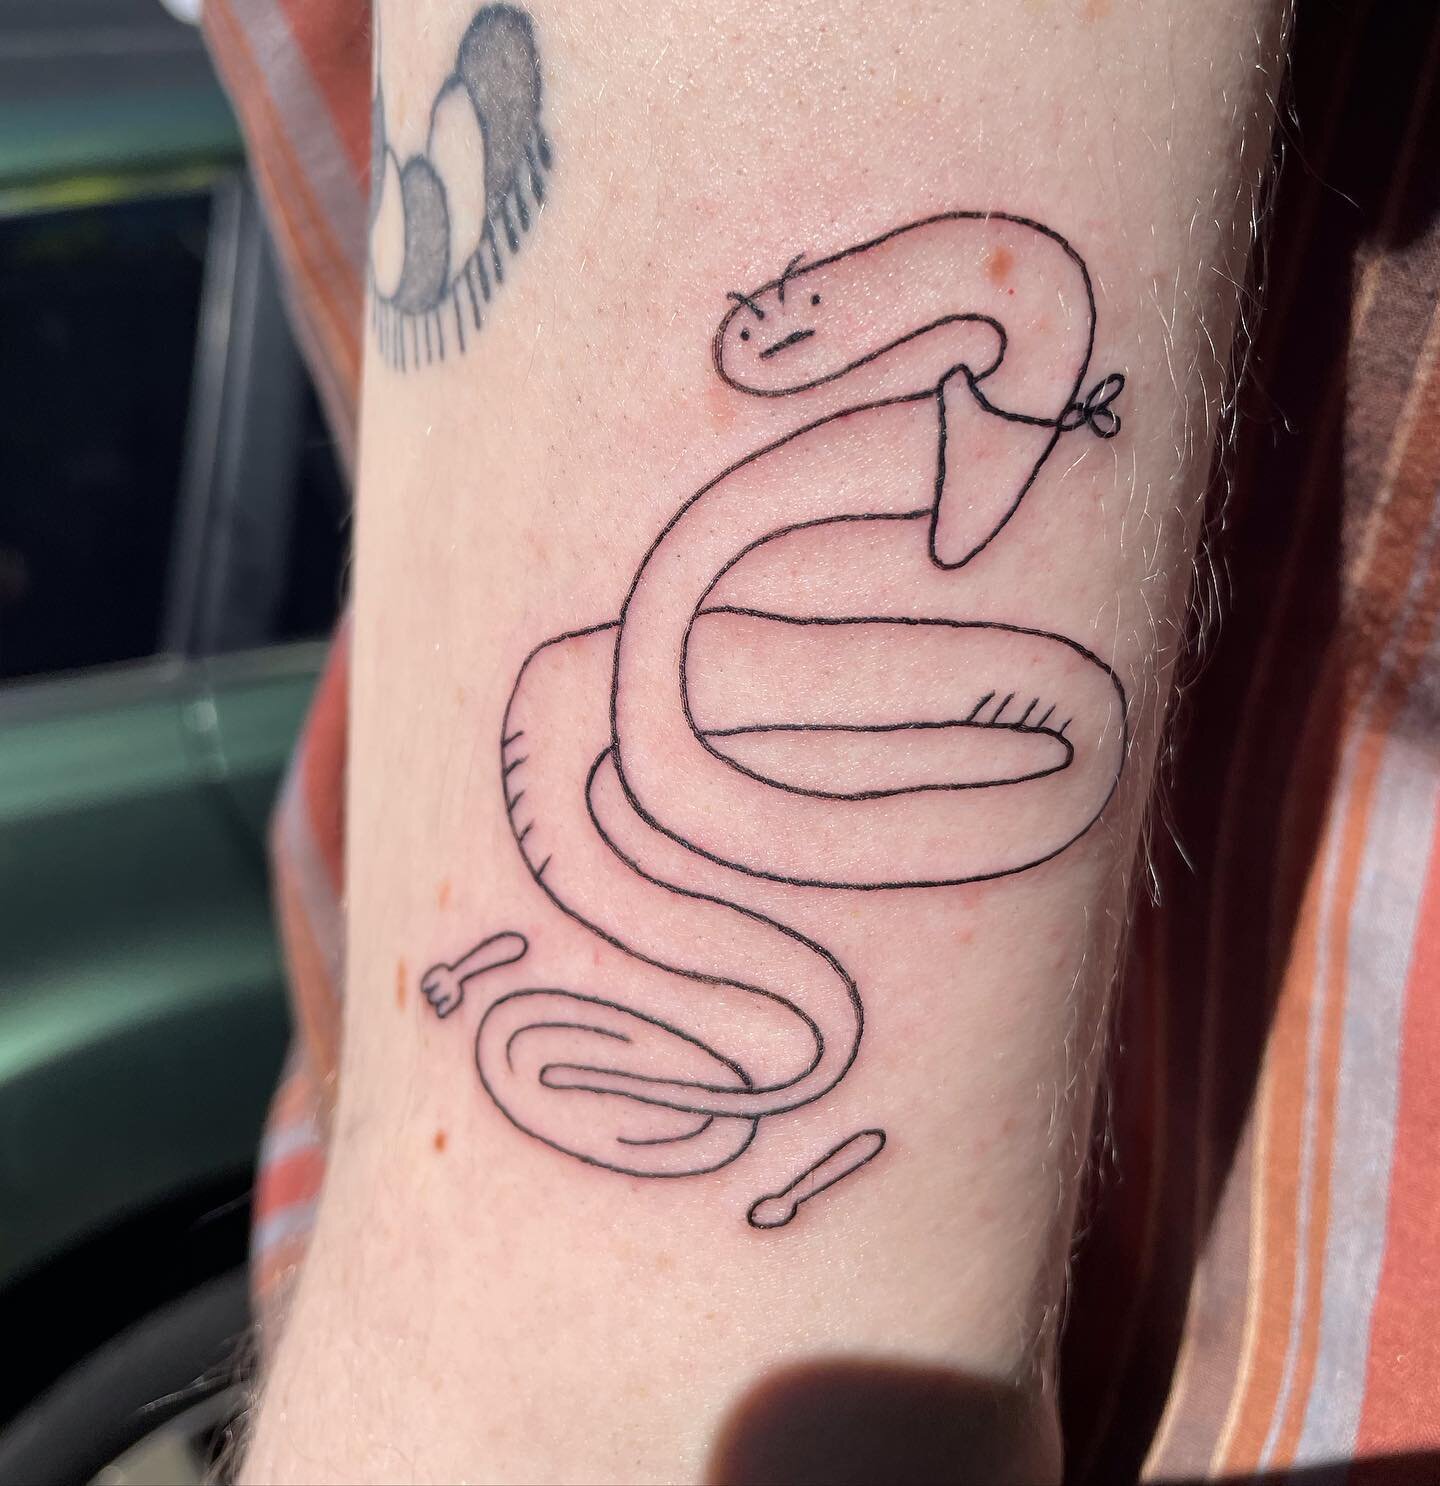 Ouroborous for Aerin. It was great hanging out with you; thanks for the trust!! #snake #cutesnake #snaketattoo #ouroboros #ouroborostattoo